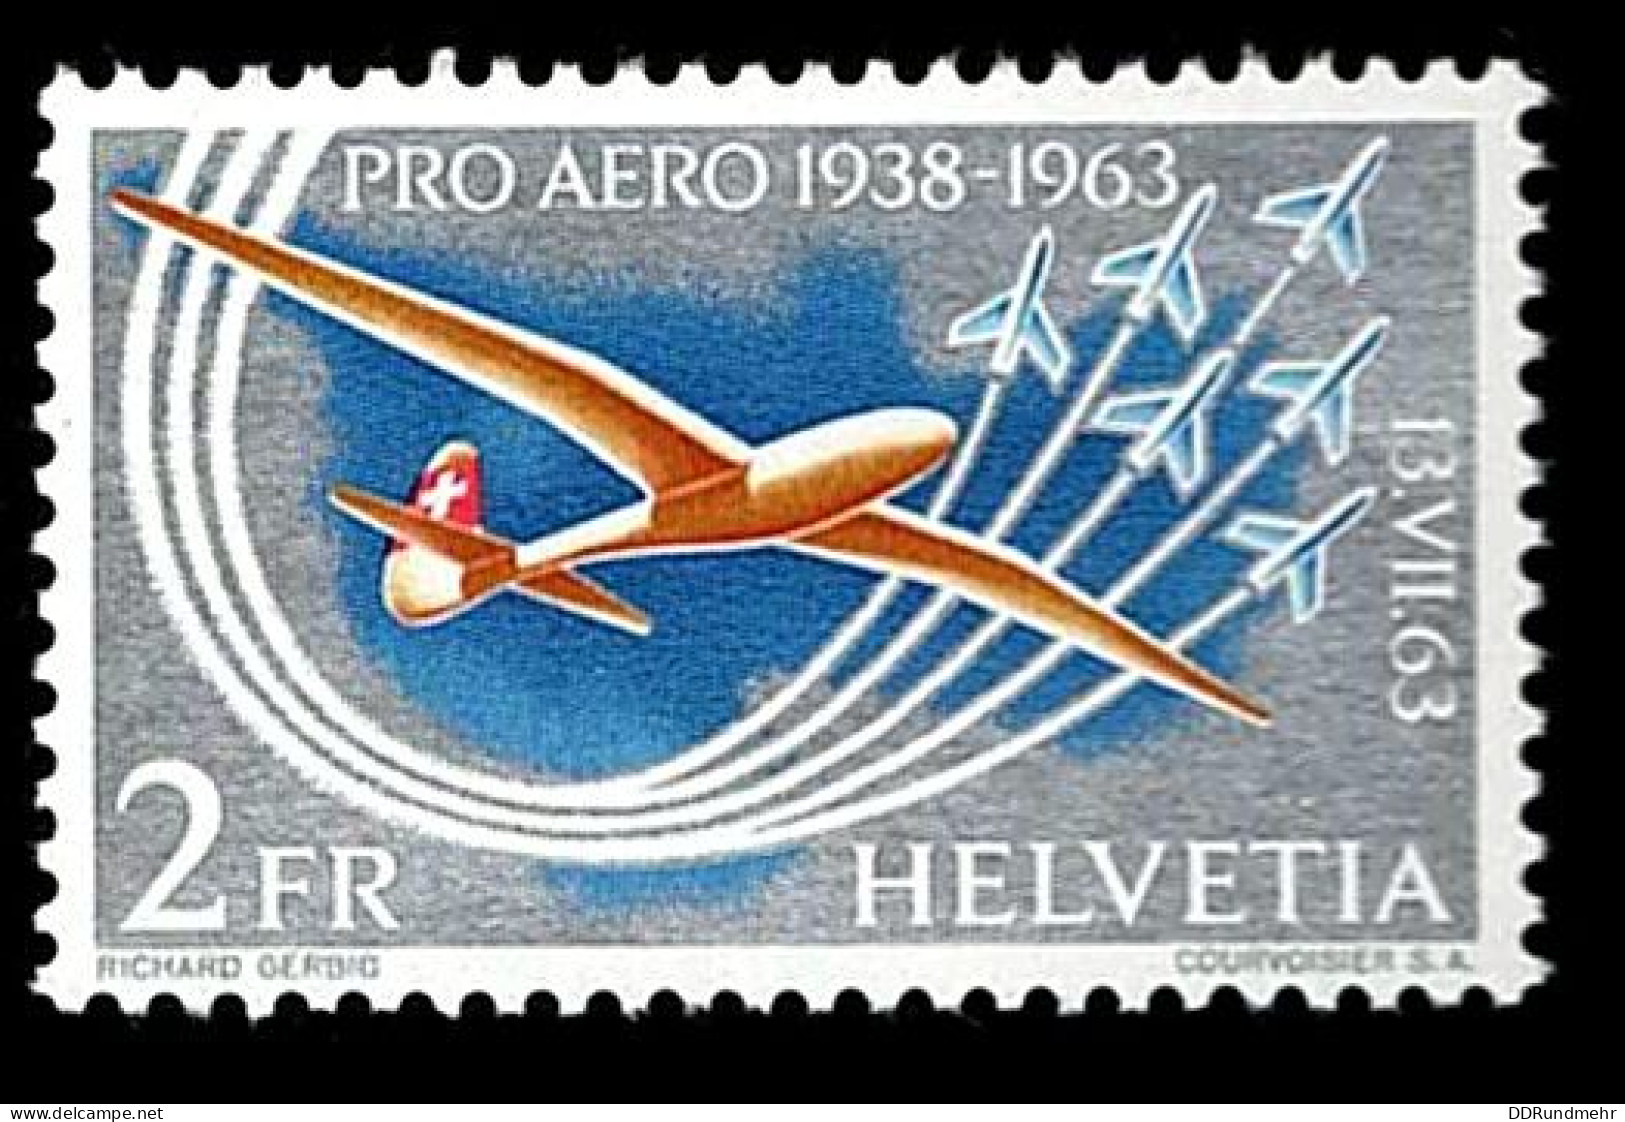 1963 Pro Aero  Michel CH 780 Stamp Number CH C46 Yvert Et Tellier CH PA45 Stanley Gibbons CH 681 Unificato CH A45 Xx MNH - Ongebruikt